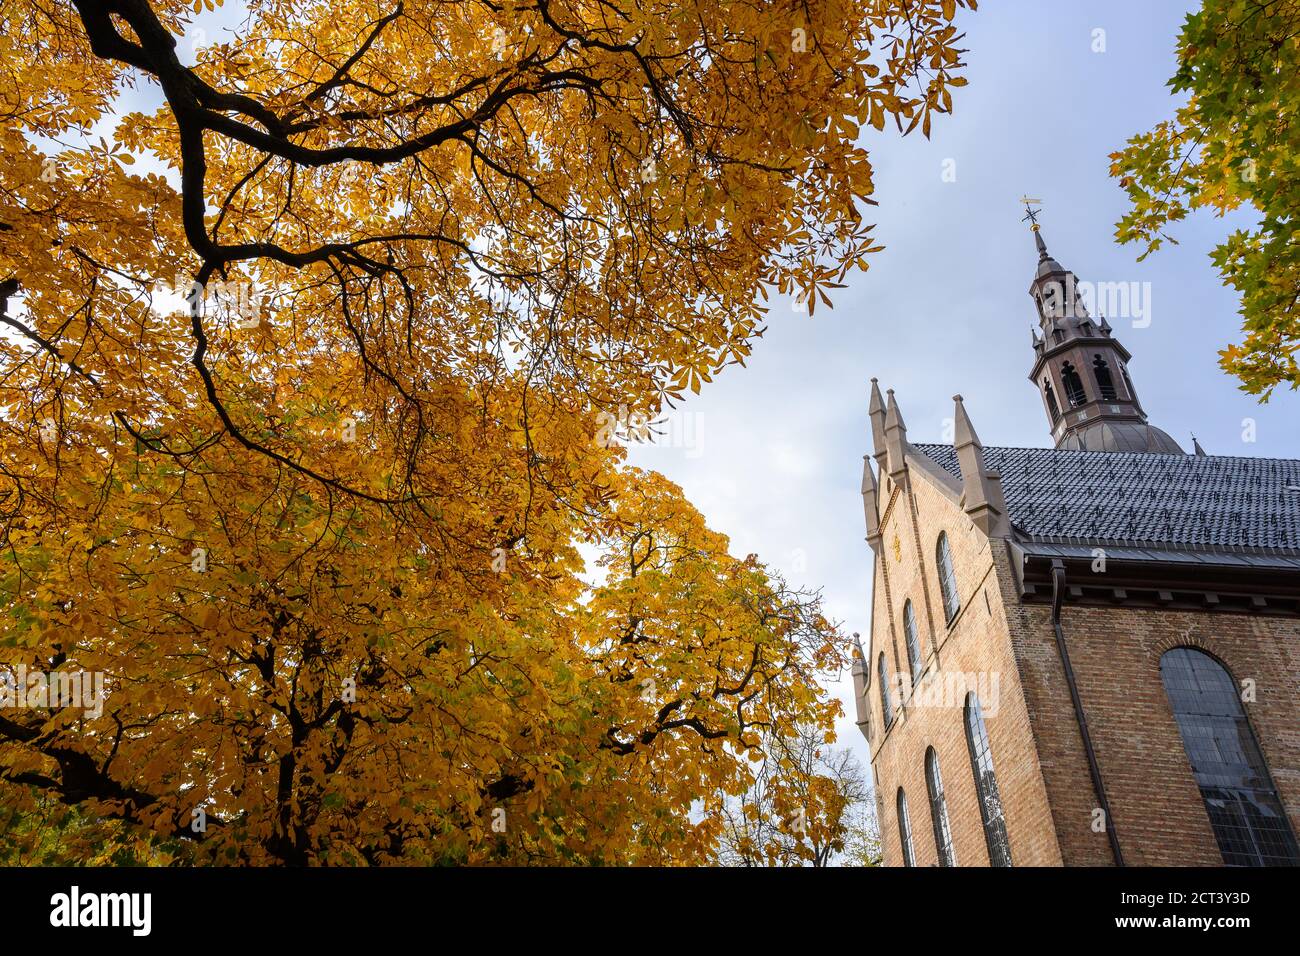 In the courtyard of the Oslo Cathedral in the autumn The trees in the garden of the leaves turn yellow and orange. Beautiful, in the evening the sky i Stock Photo